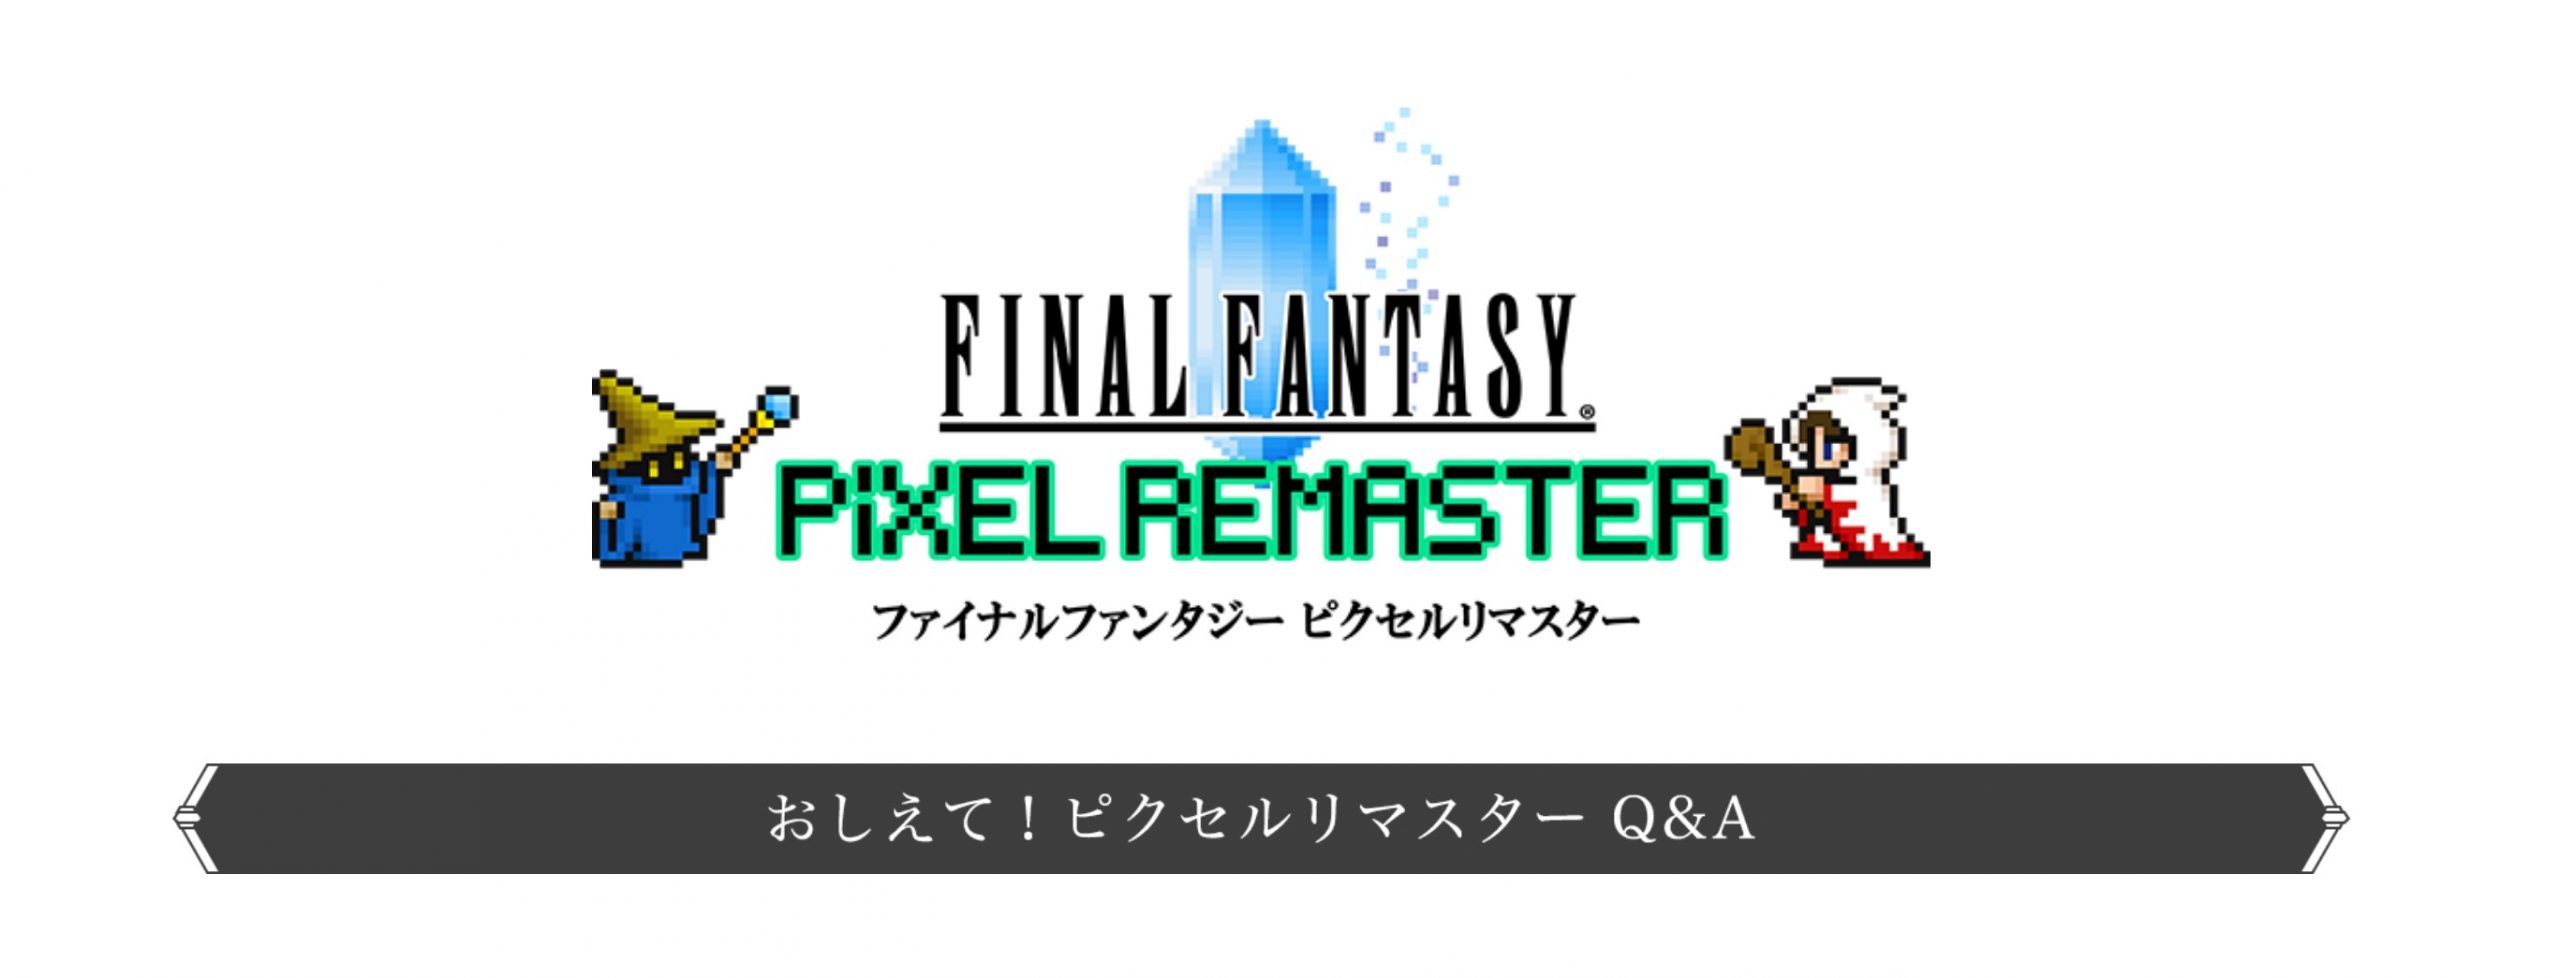 download ff pixel remaster collection